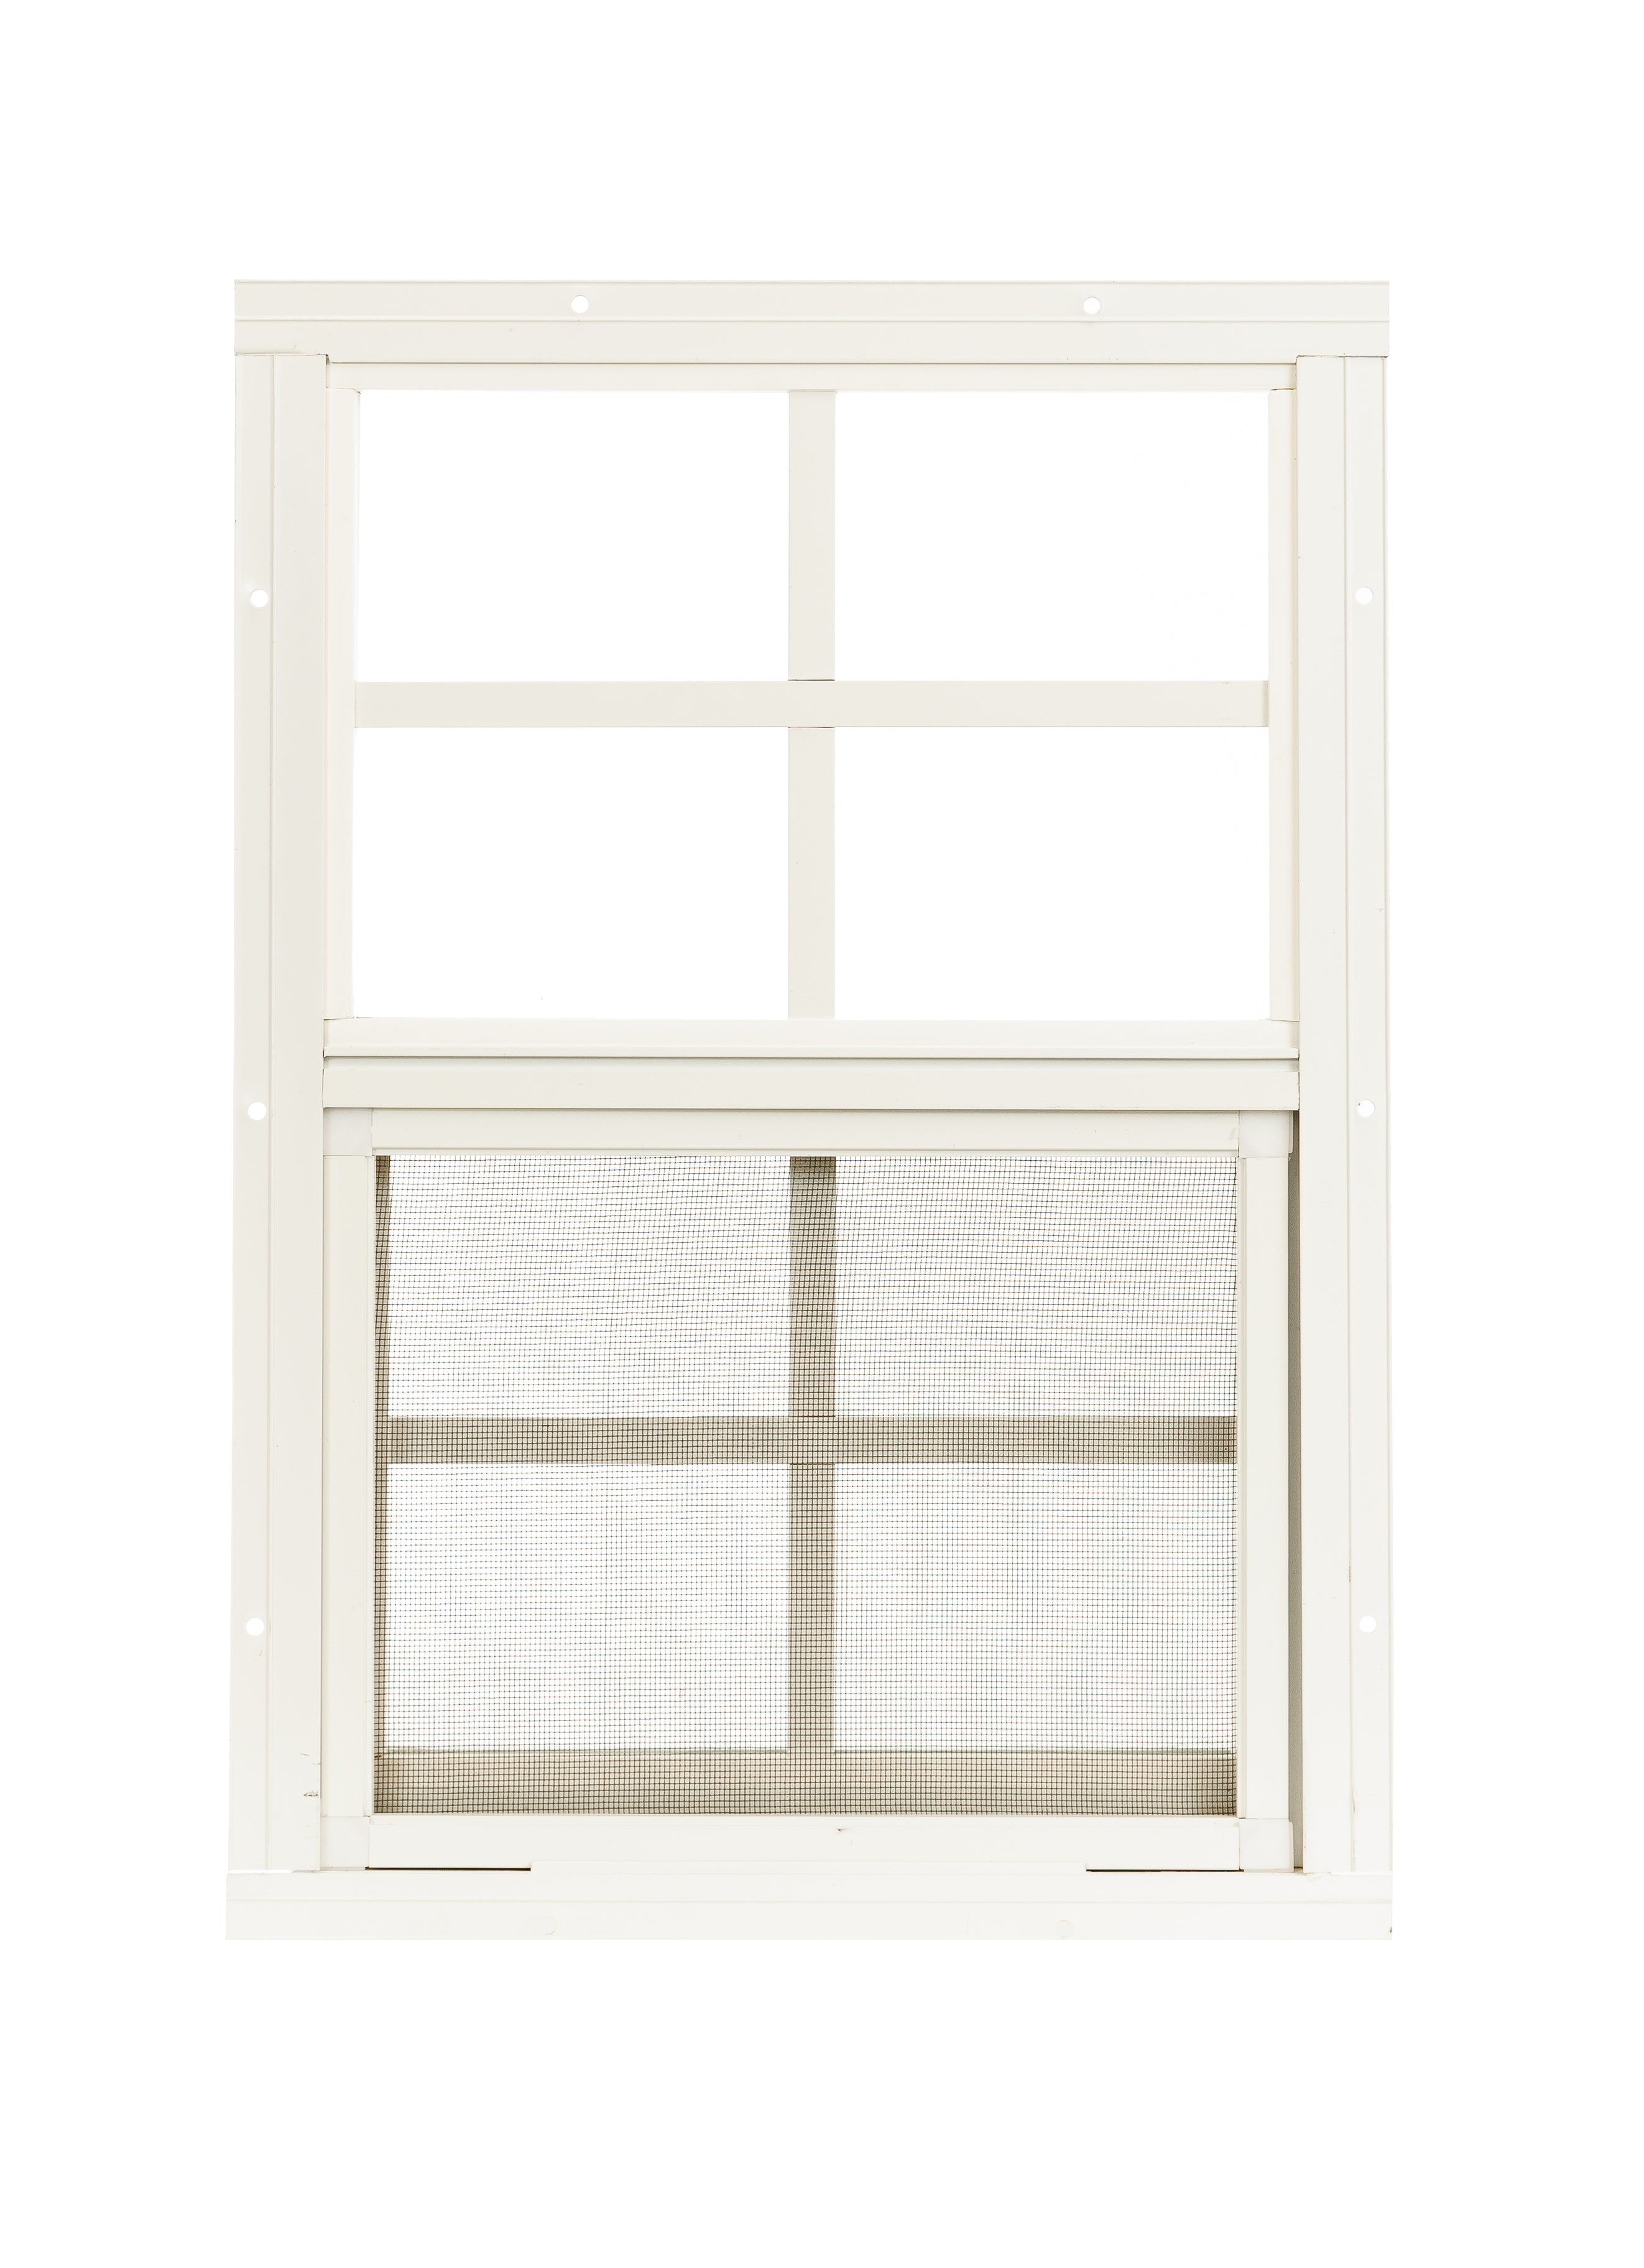 12" W x 18" H Single Hung Flush Mount White Window for Sheds, Playhouses, and MORE